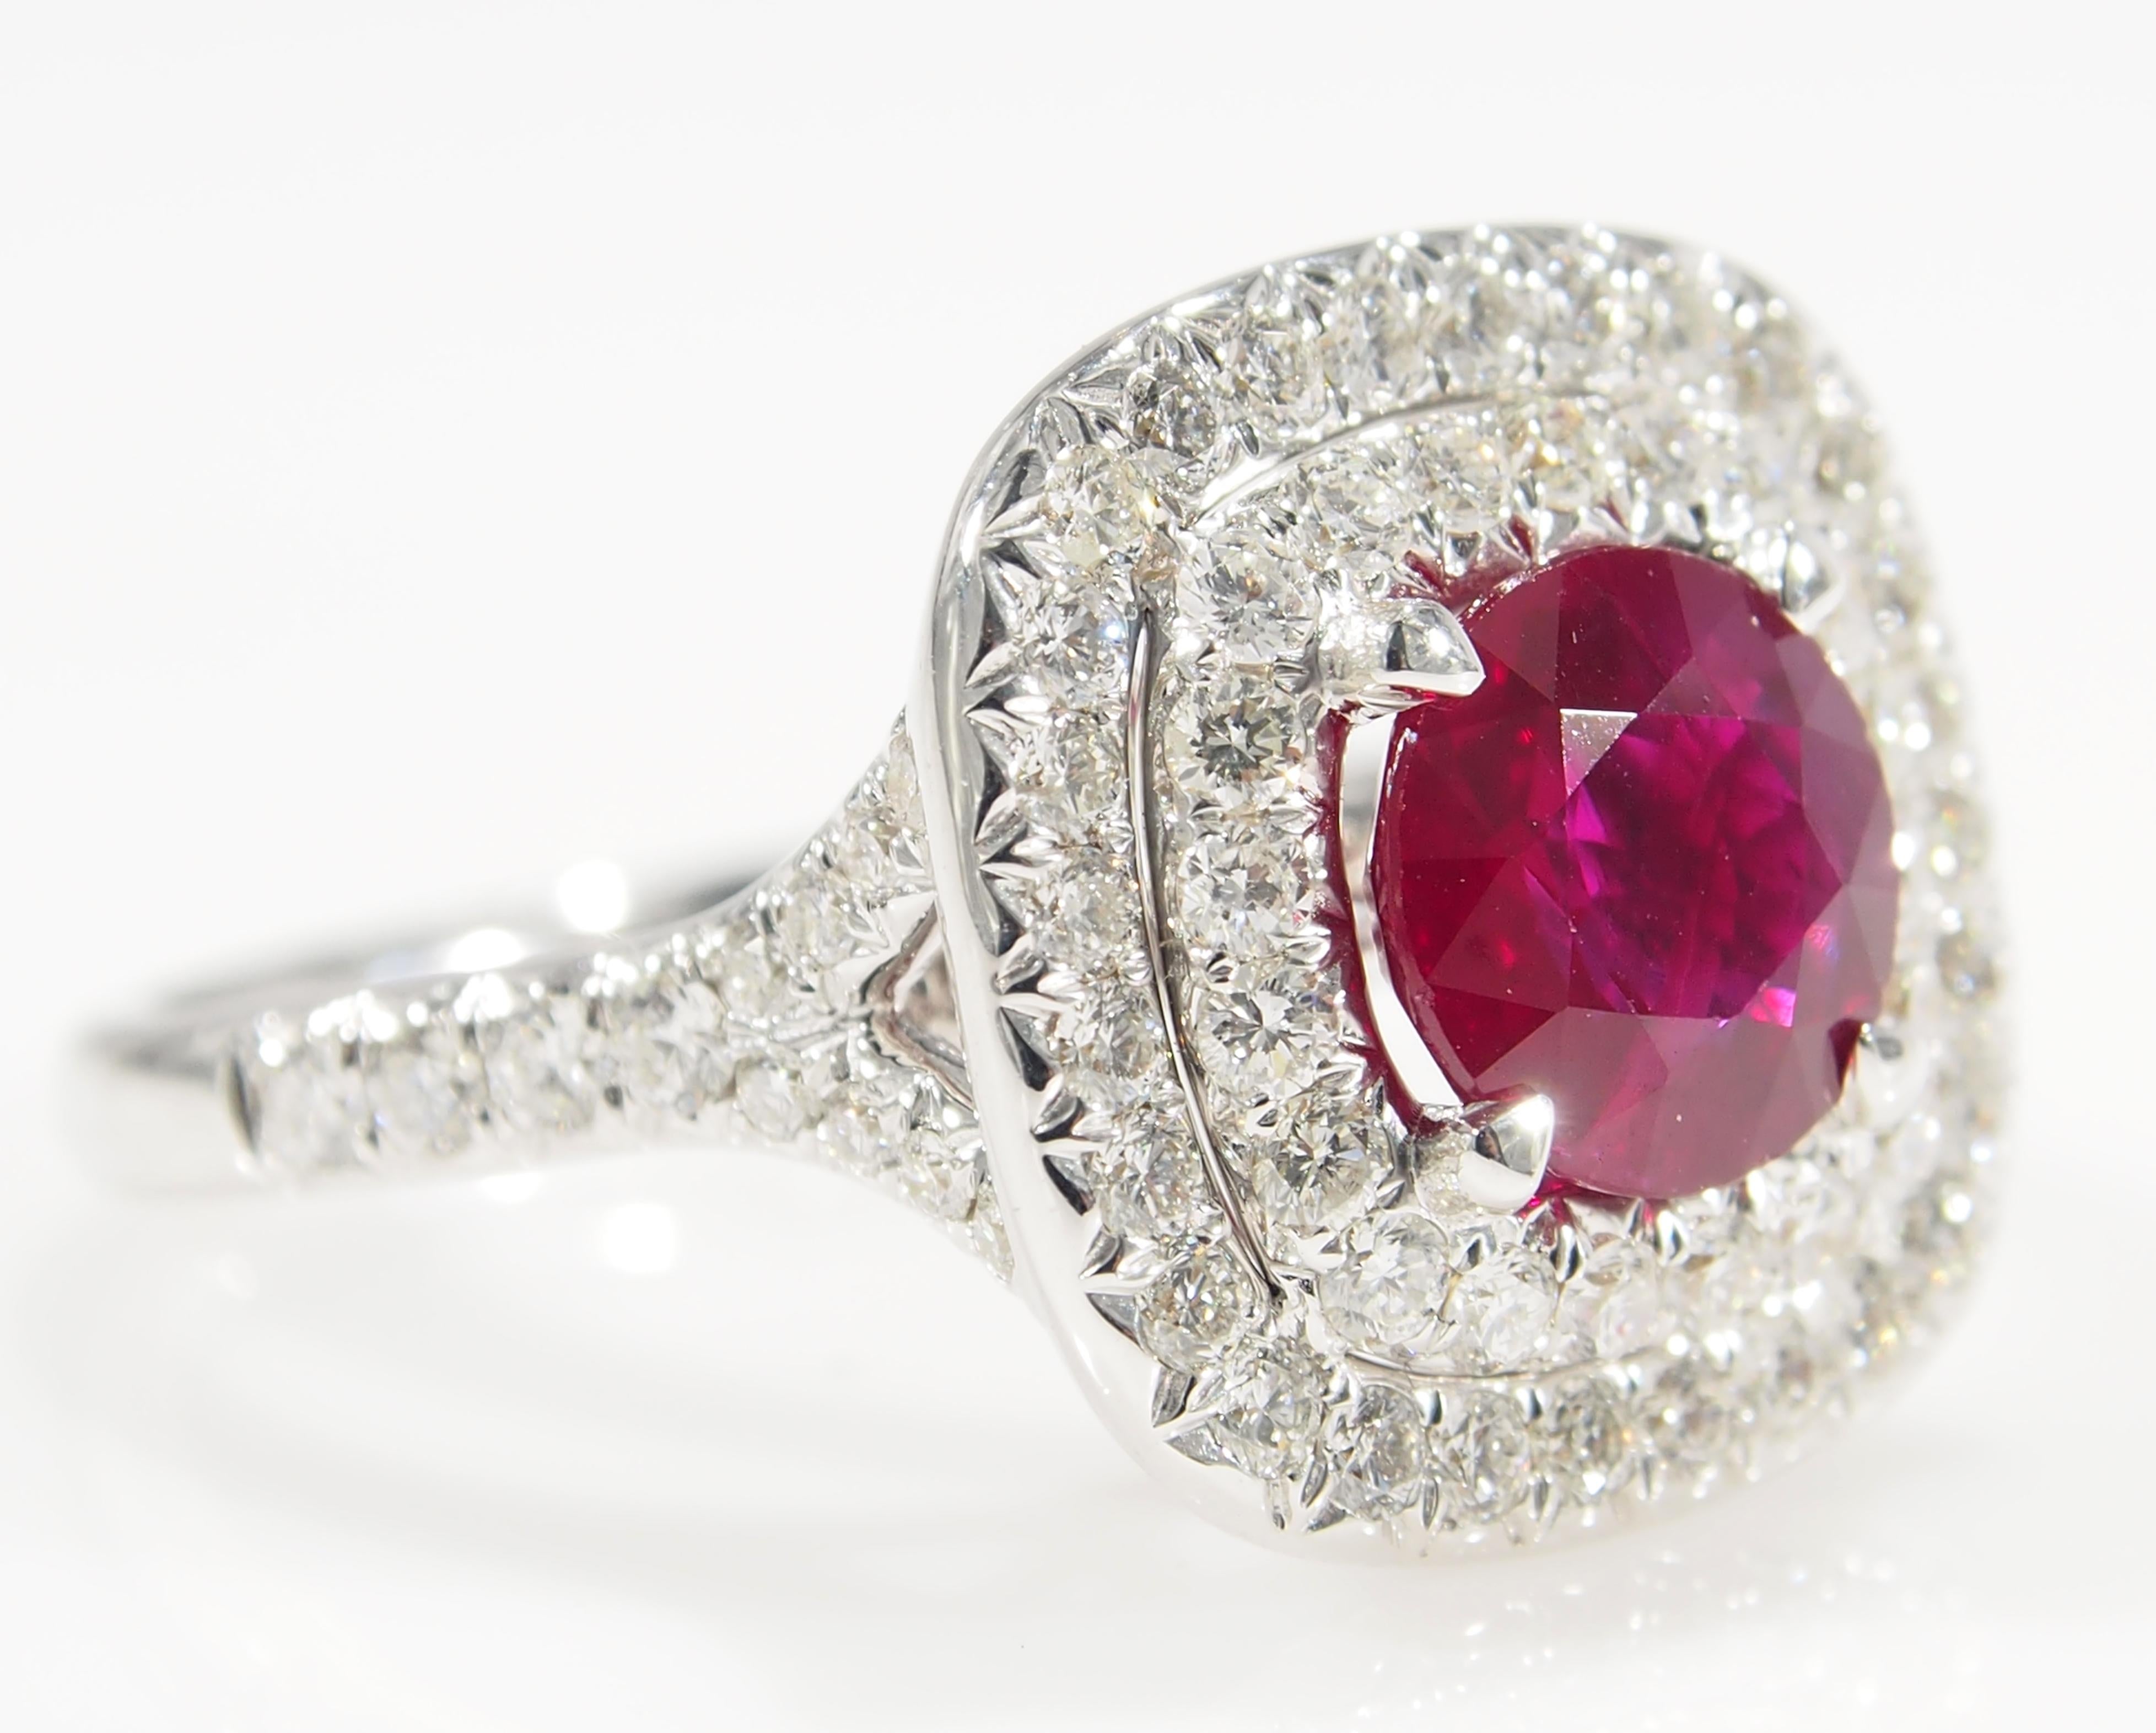 This is a classic 18K White Gold Diamond and Ruby Ring. There are (72) Round Brilliant Cut Diamonds set in a Double Halo and along the Shank for approximately 1.12ctw, G-H in Color, VS-SI in Clarity that accent the (1) Cushion Shape Ruby, 2.03ct. An